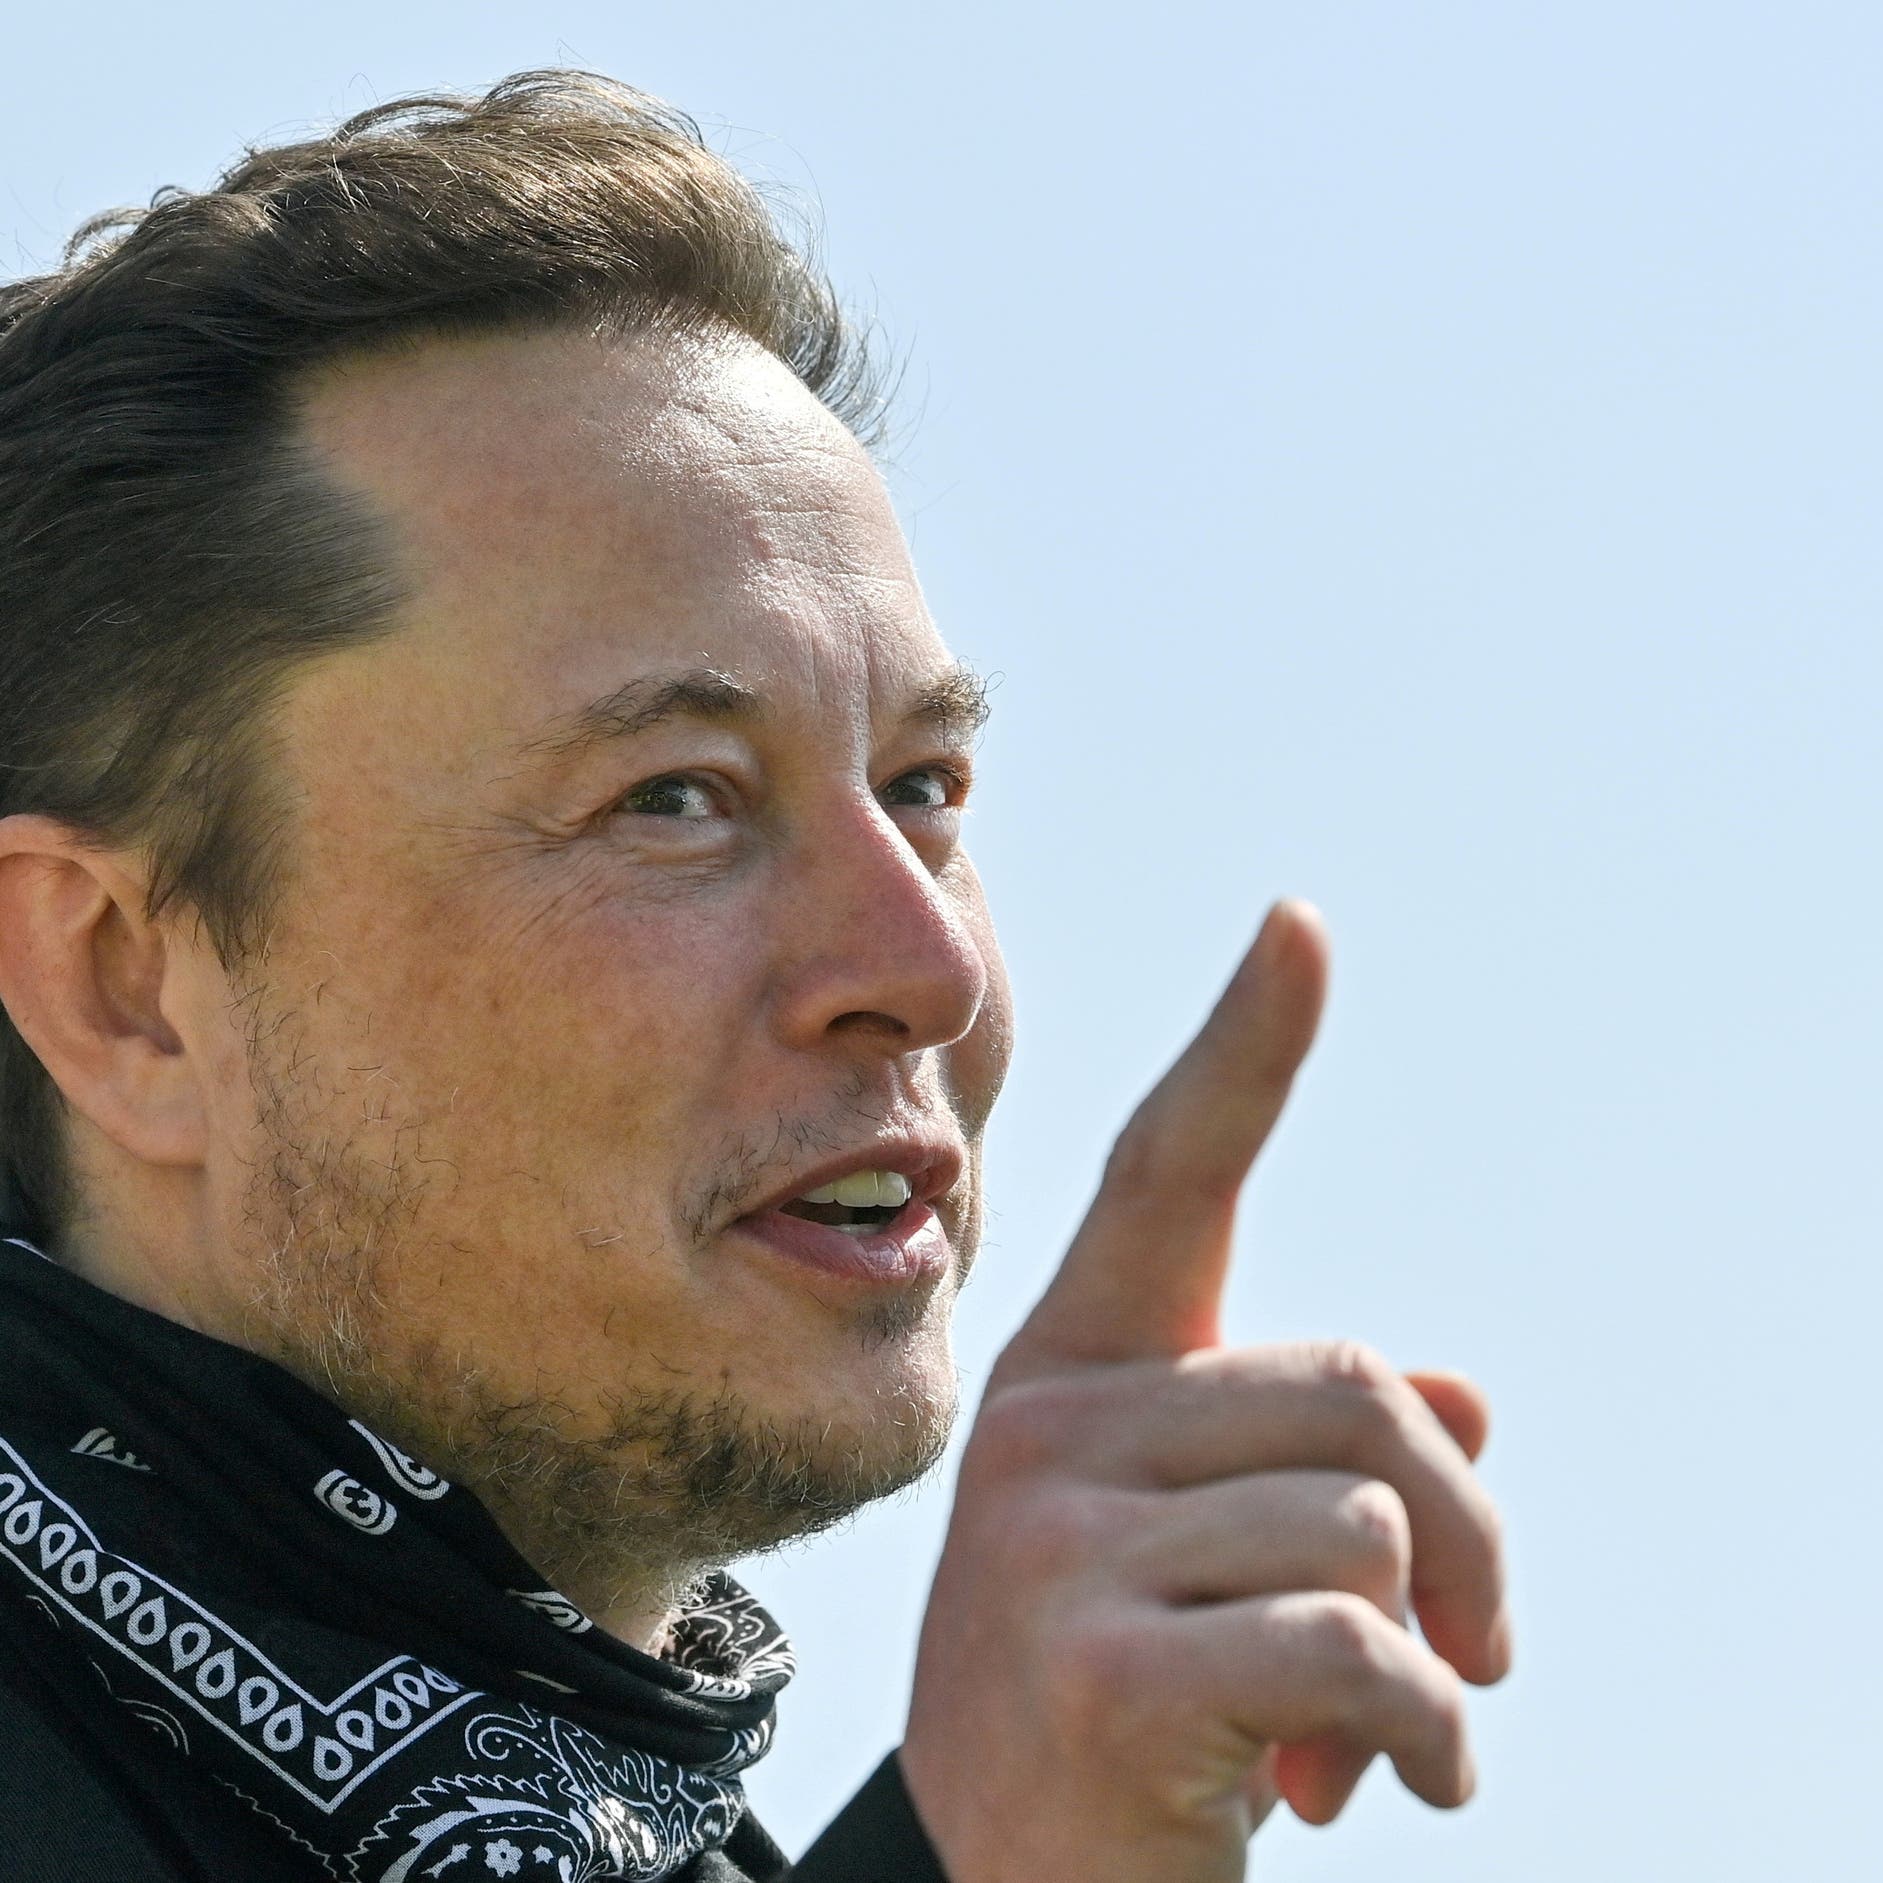 Elon Musk says will sell Tesla stock to solve world hunger, wants proof from UN first